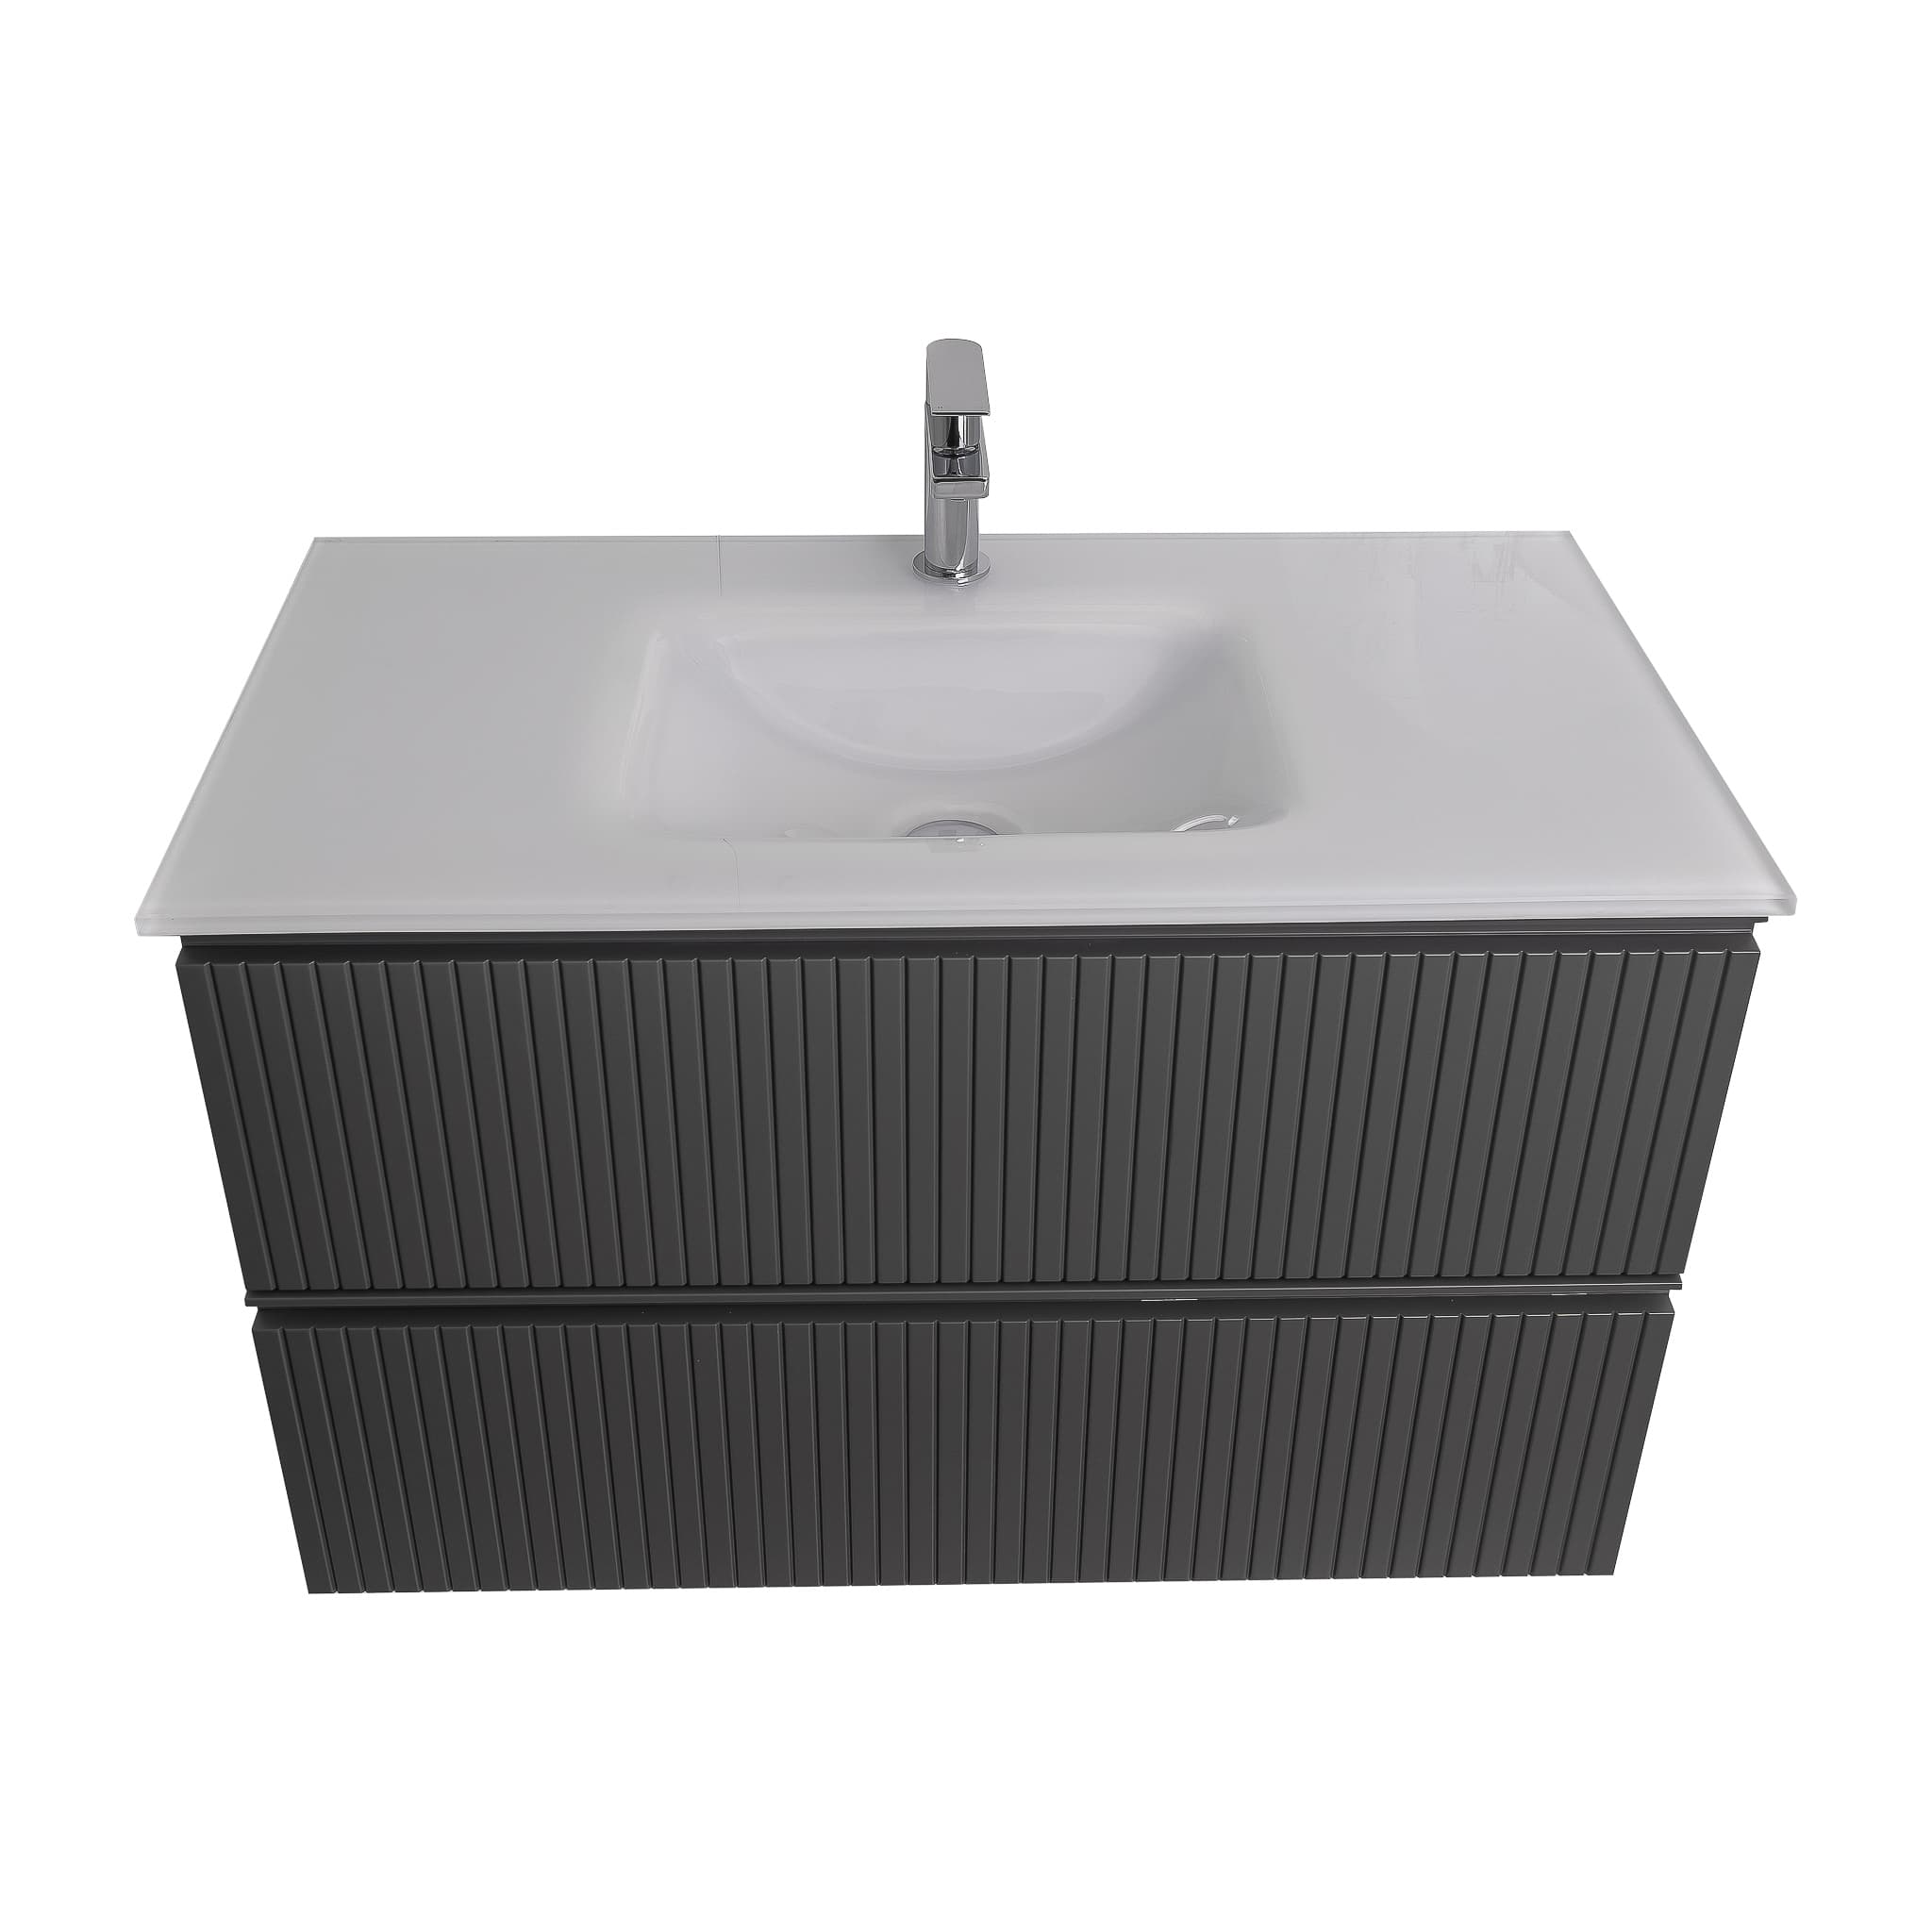 Ares 39.5 Matte Grey Cabinet, White Tempered Glass Sink, Wall Mounted Modern Vanity Set